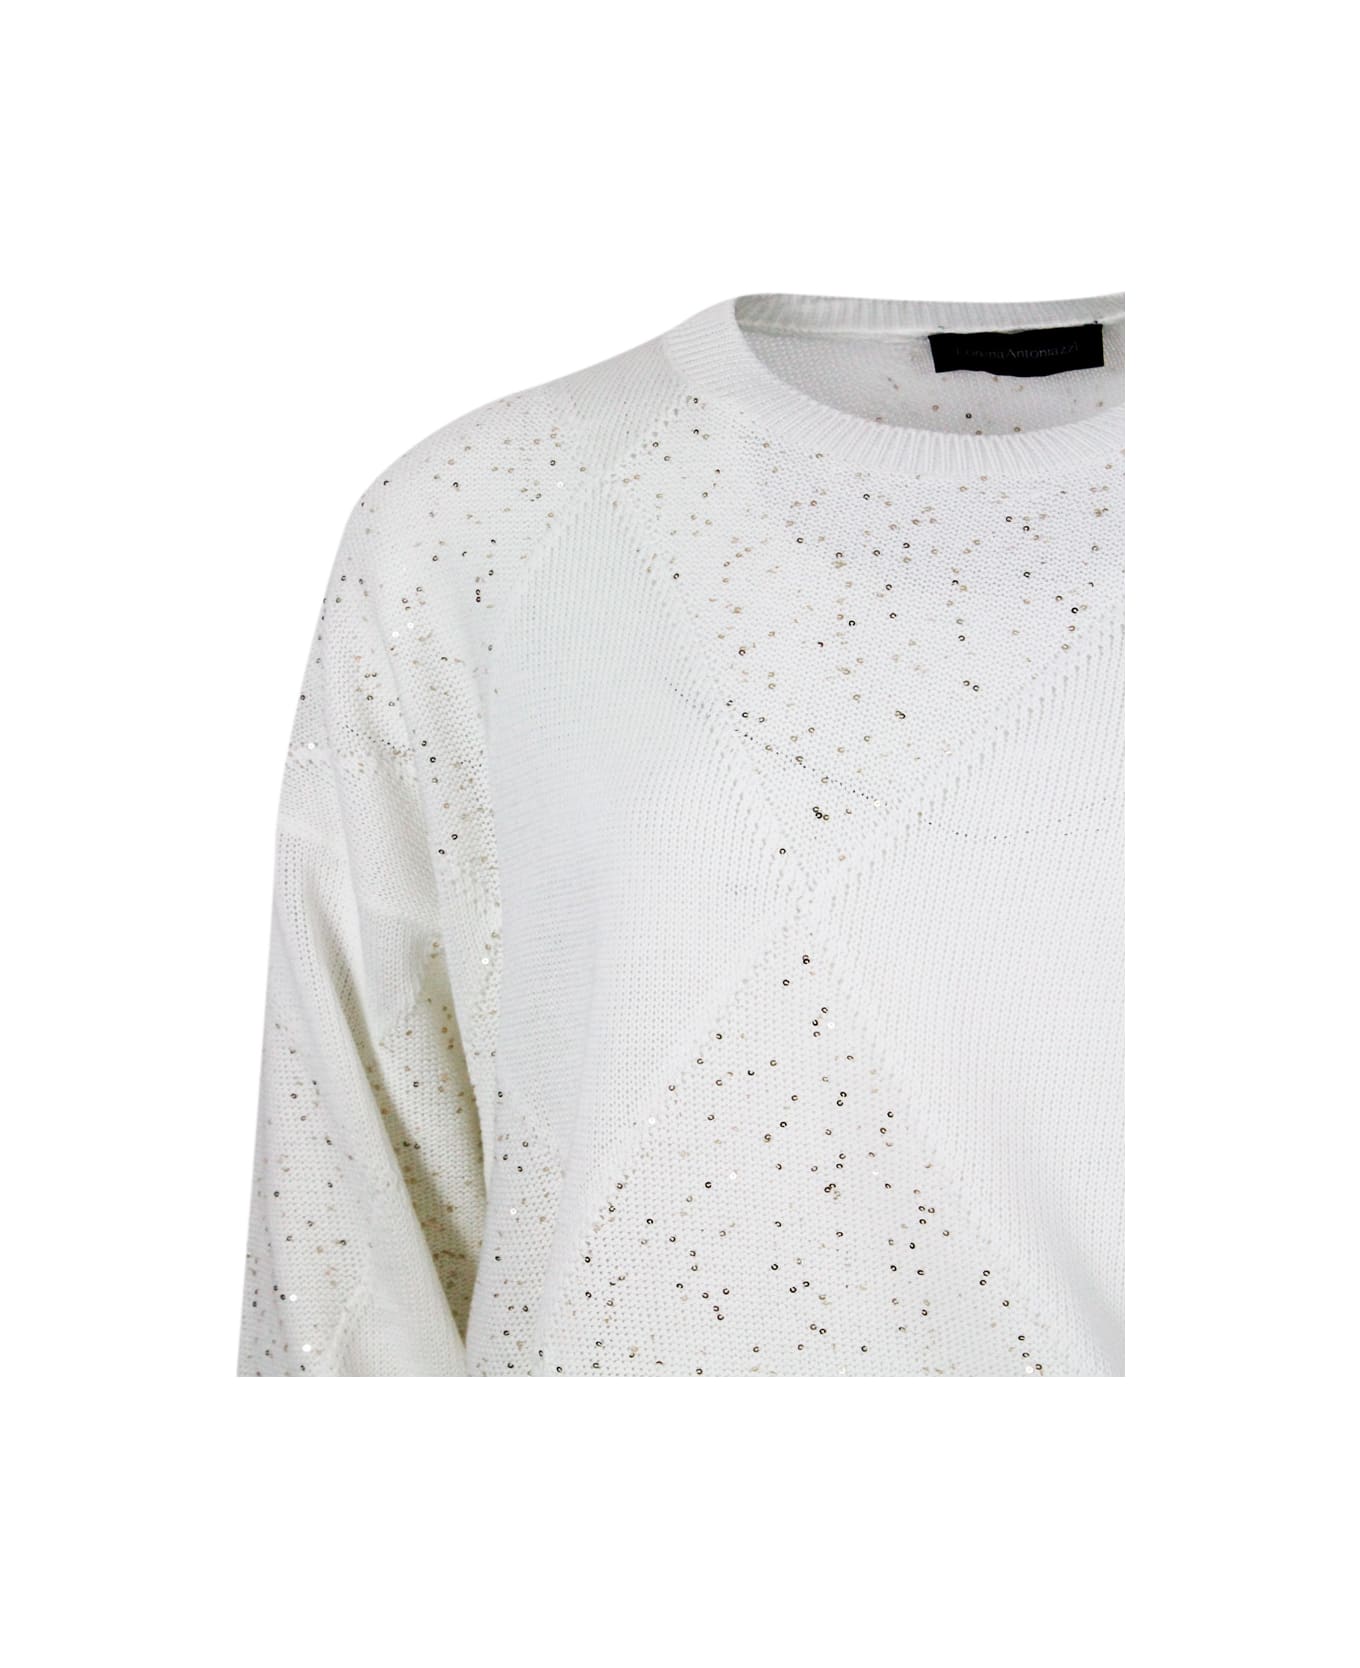 Lorena Antoniazzi Long-sleeved Crew-neck Sweater In Cotton Thread With Diamond Pattern Embellished With Microsequins - White ニットウェア